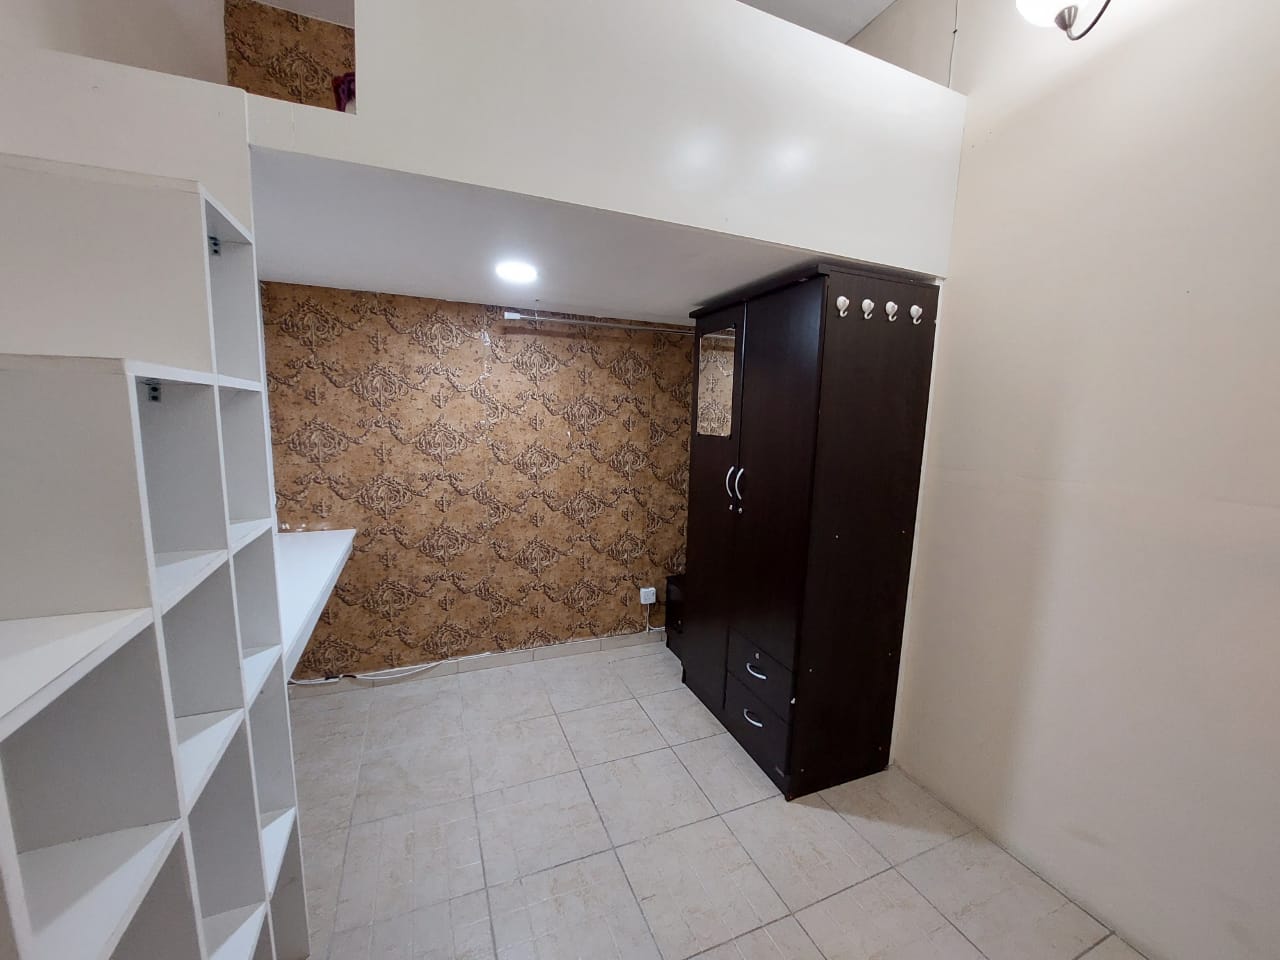 Loft Type Closed Partition Room With Sharing Bathroom 605 Room 2